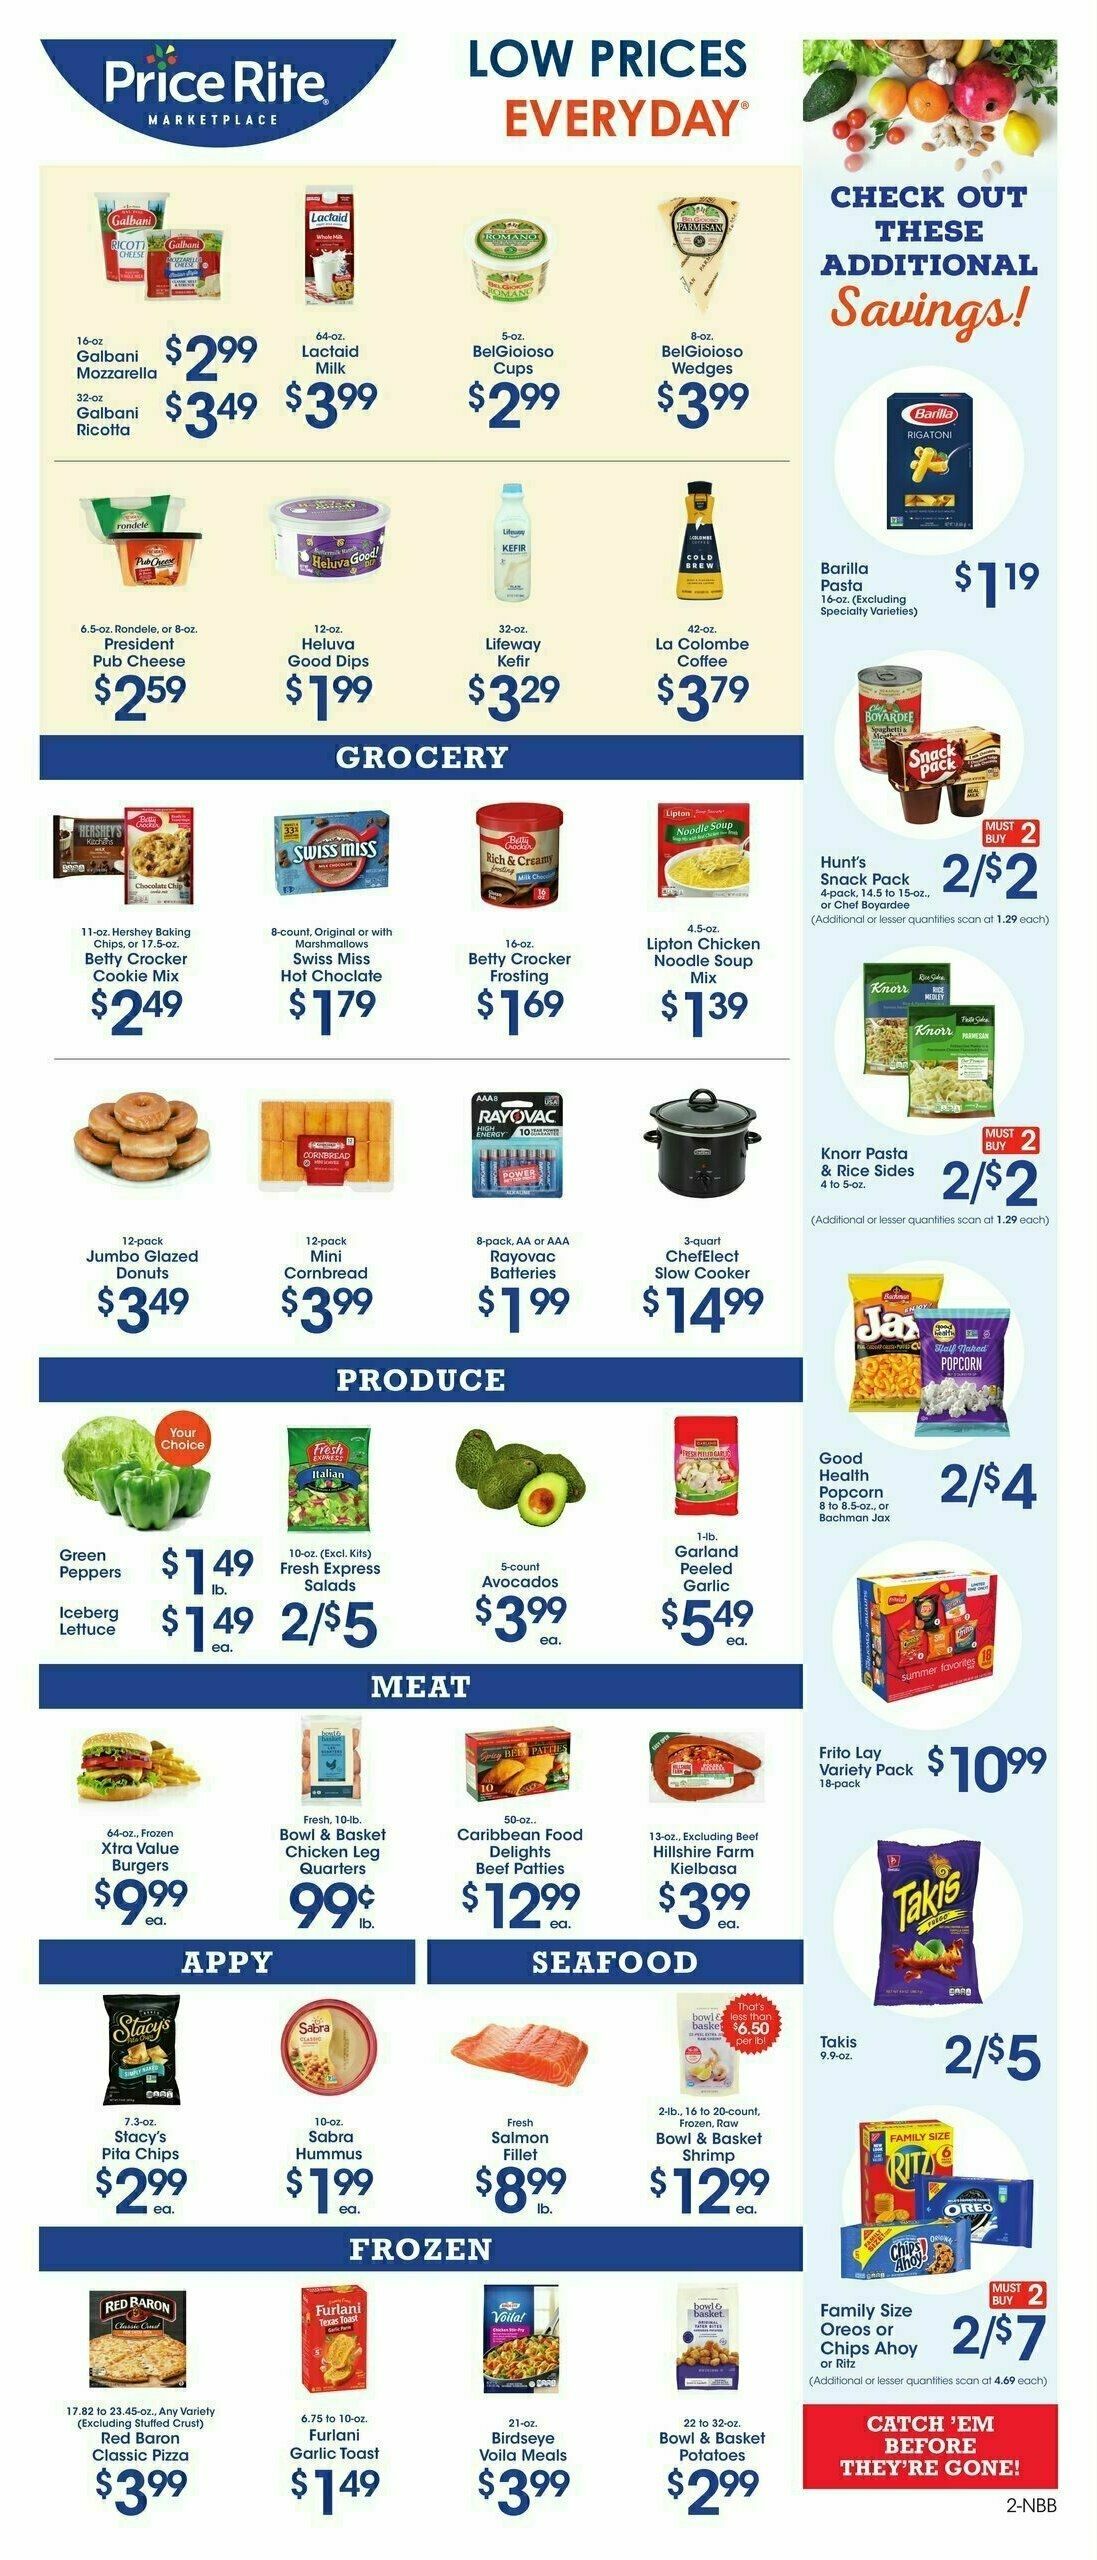 Price Rite Weekly Ad from October 6